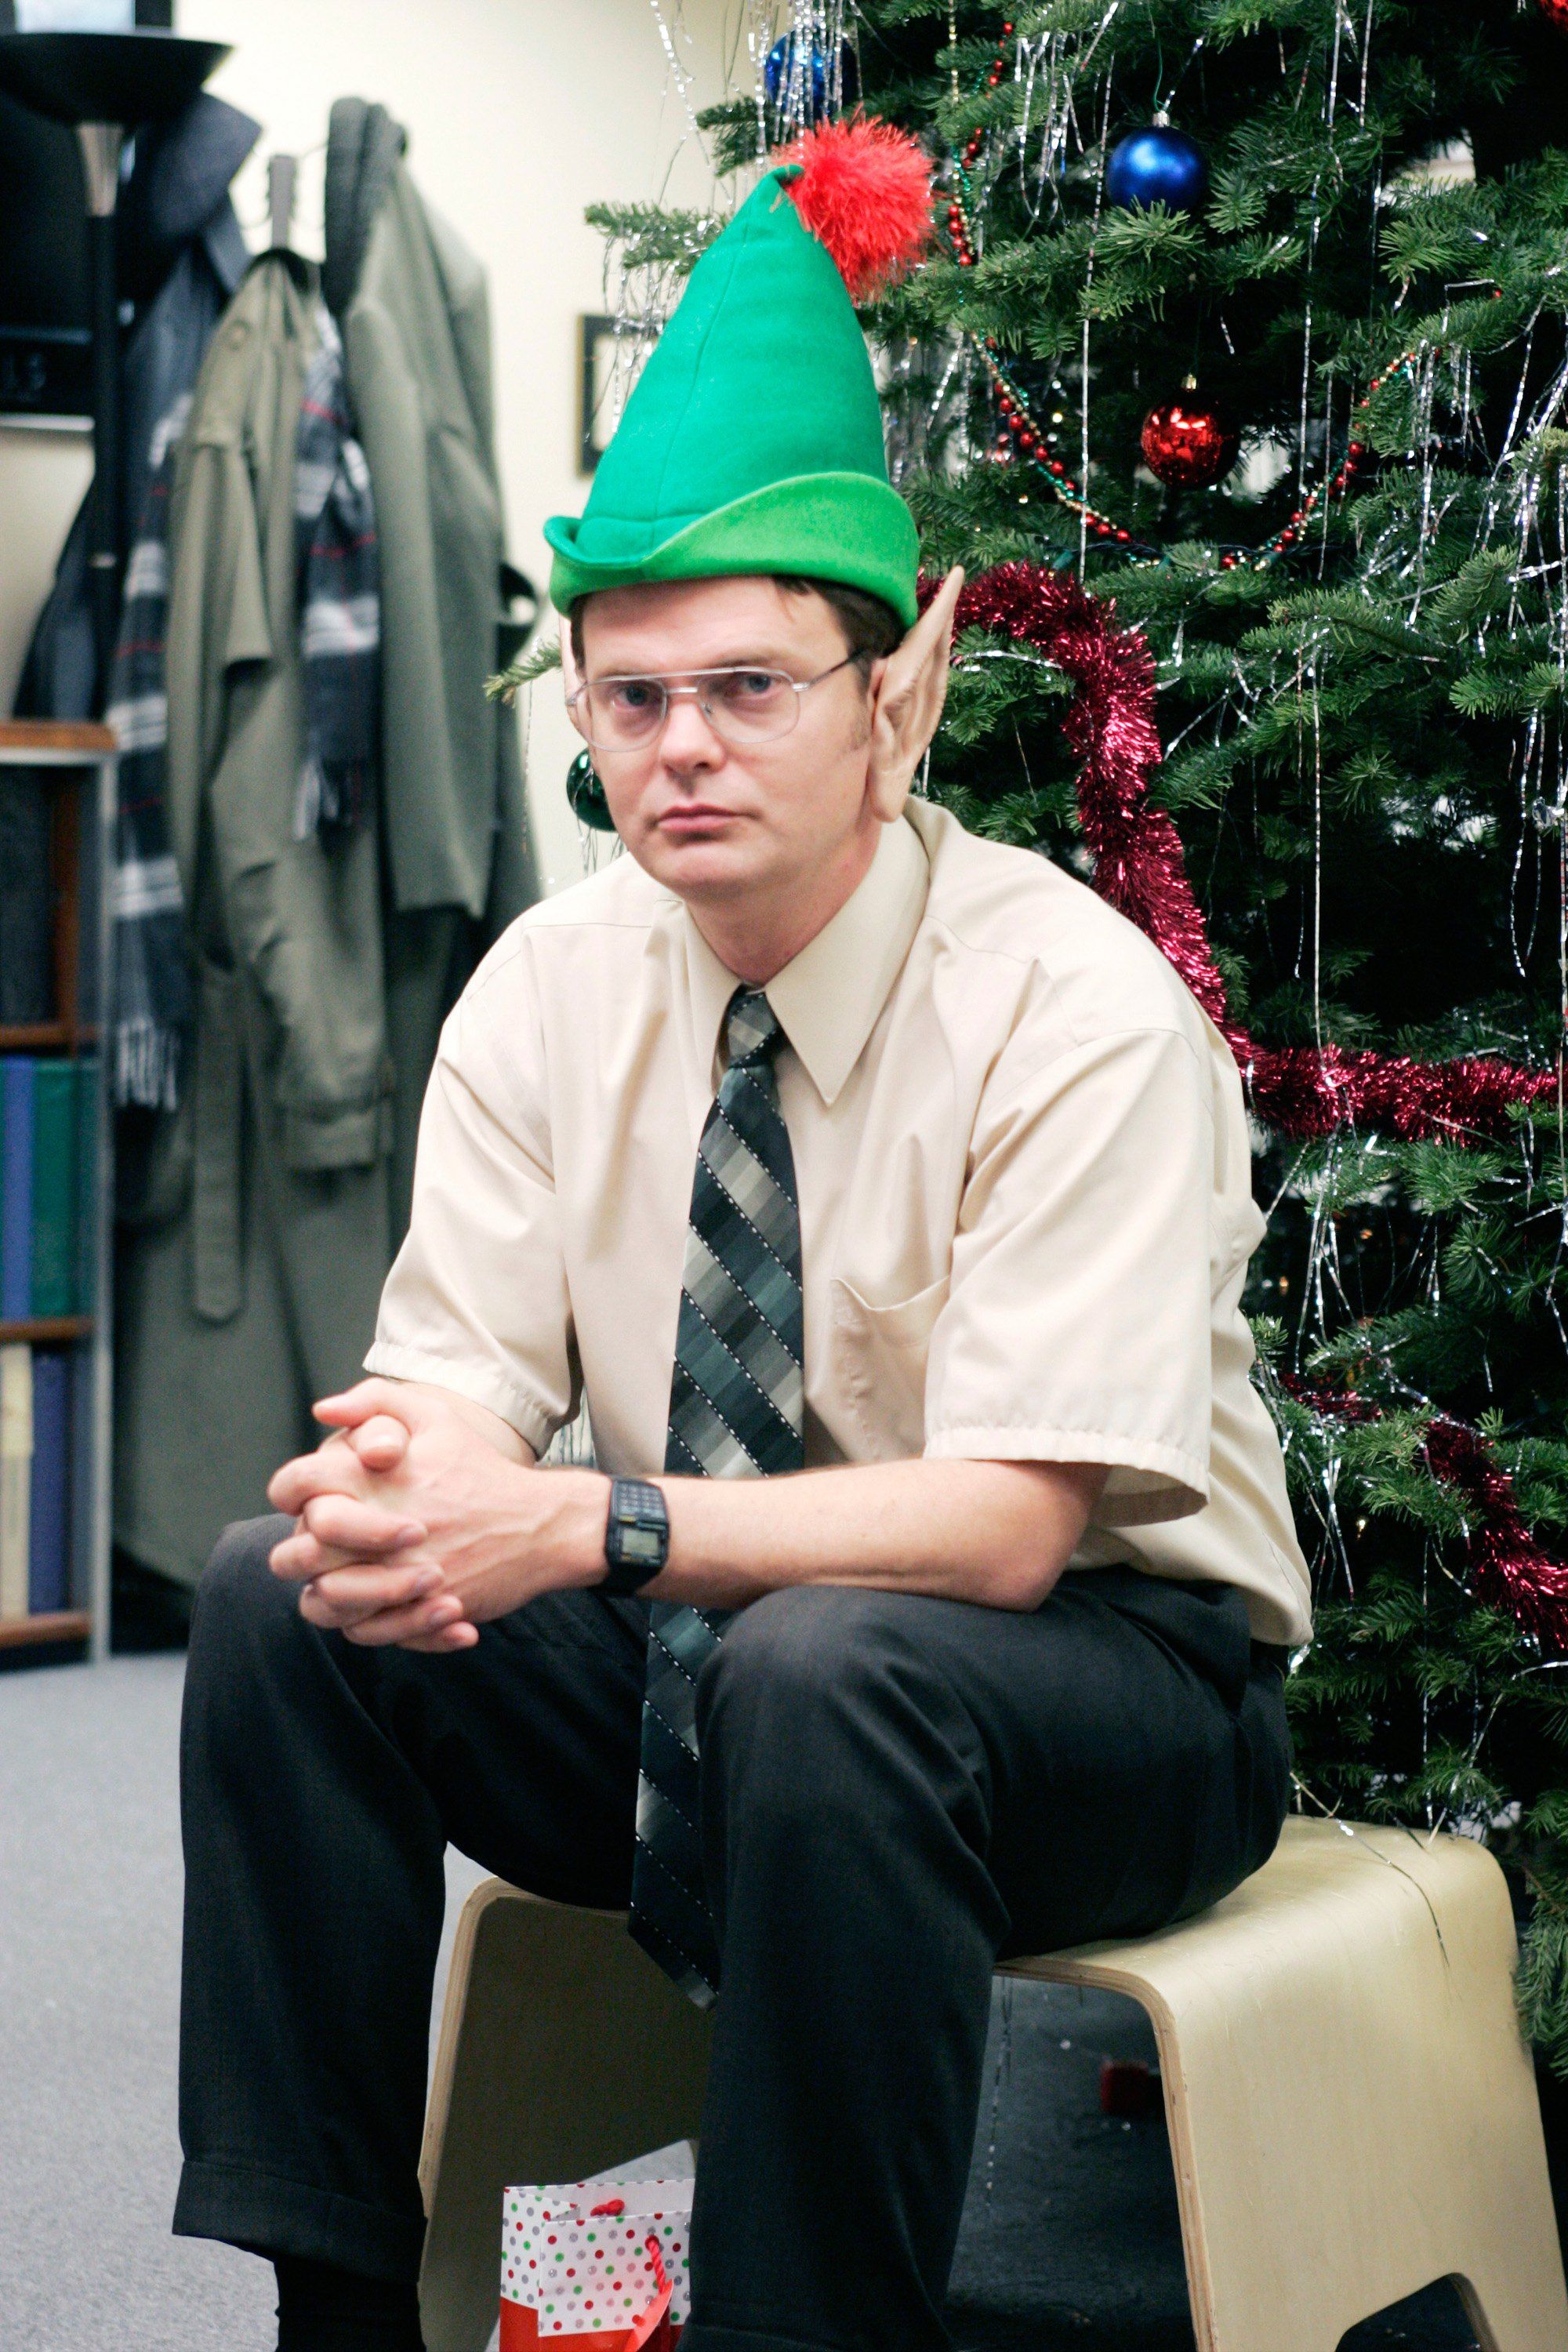 Download The 9 The Office Christmas Episodes Ranked From Worst To Best SVG Cut Files